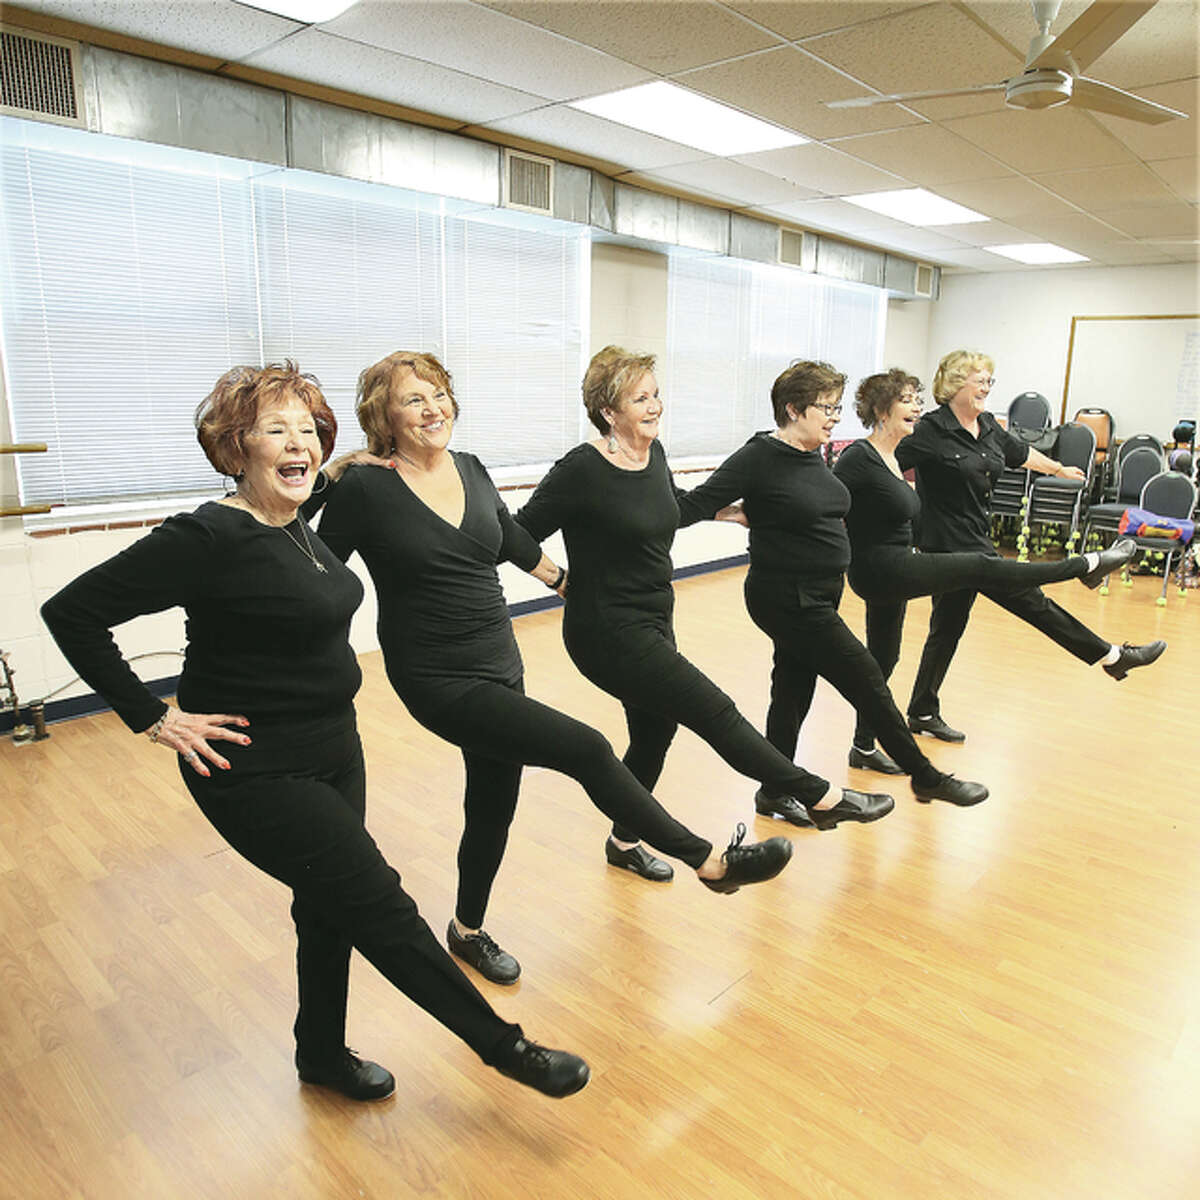 The women in an adult tap class made it look easy, but it was a lot of coordination and hard work as seen through the wall-sized mirror dancers use to monitor their steps. The class is a joint program of Jennifer Bishop’s School of Dance Performing Arts Company and Senior Services Plus in Alton.